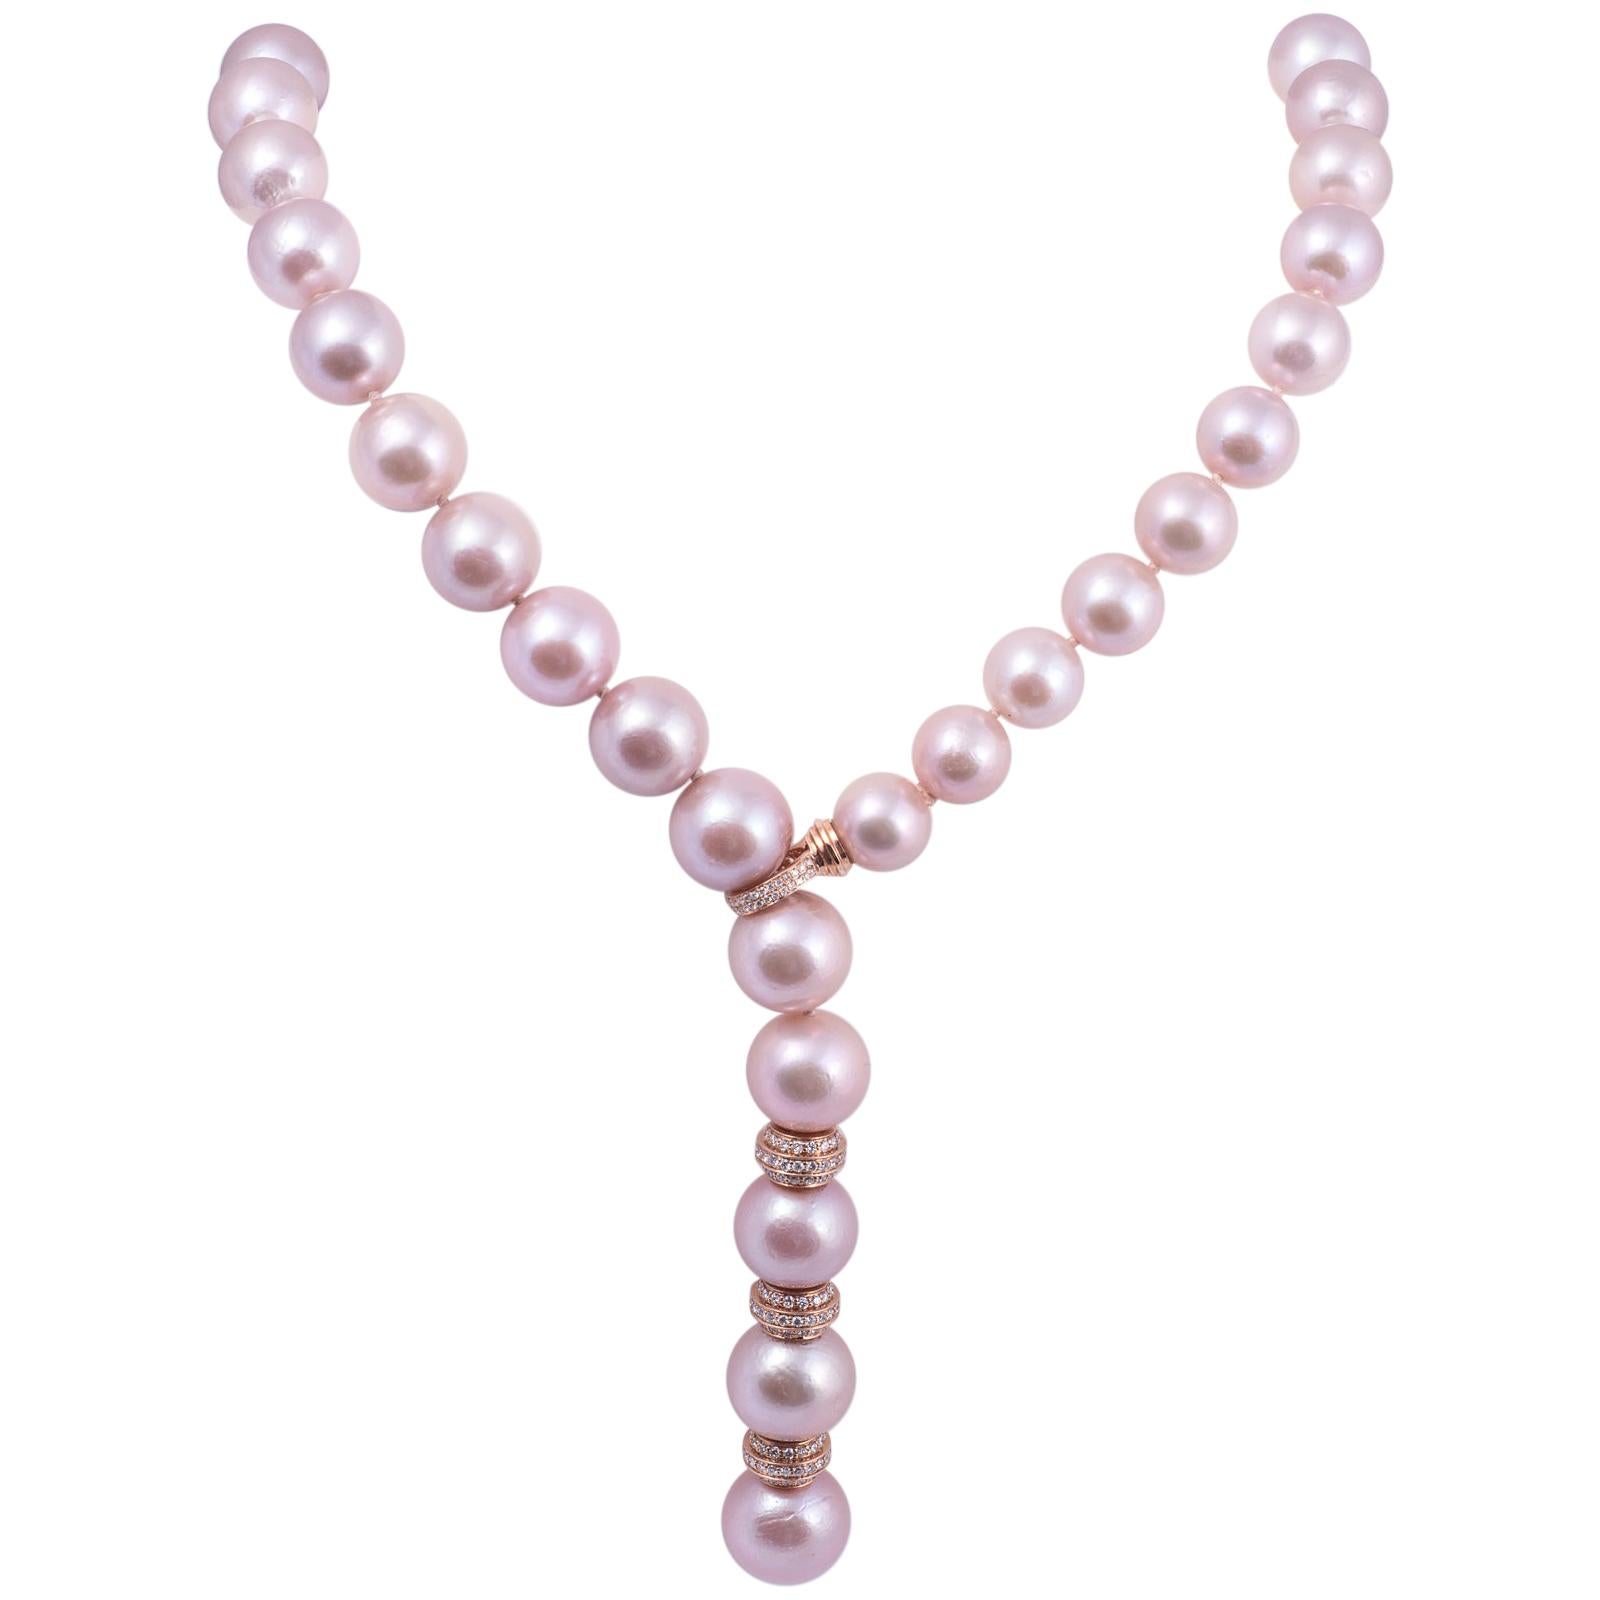 Pink Cultured Pearl Necklace with Diamond Rondelles